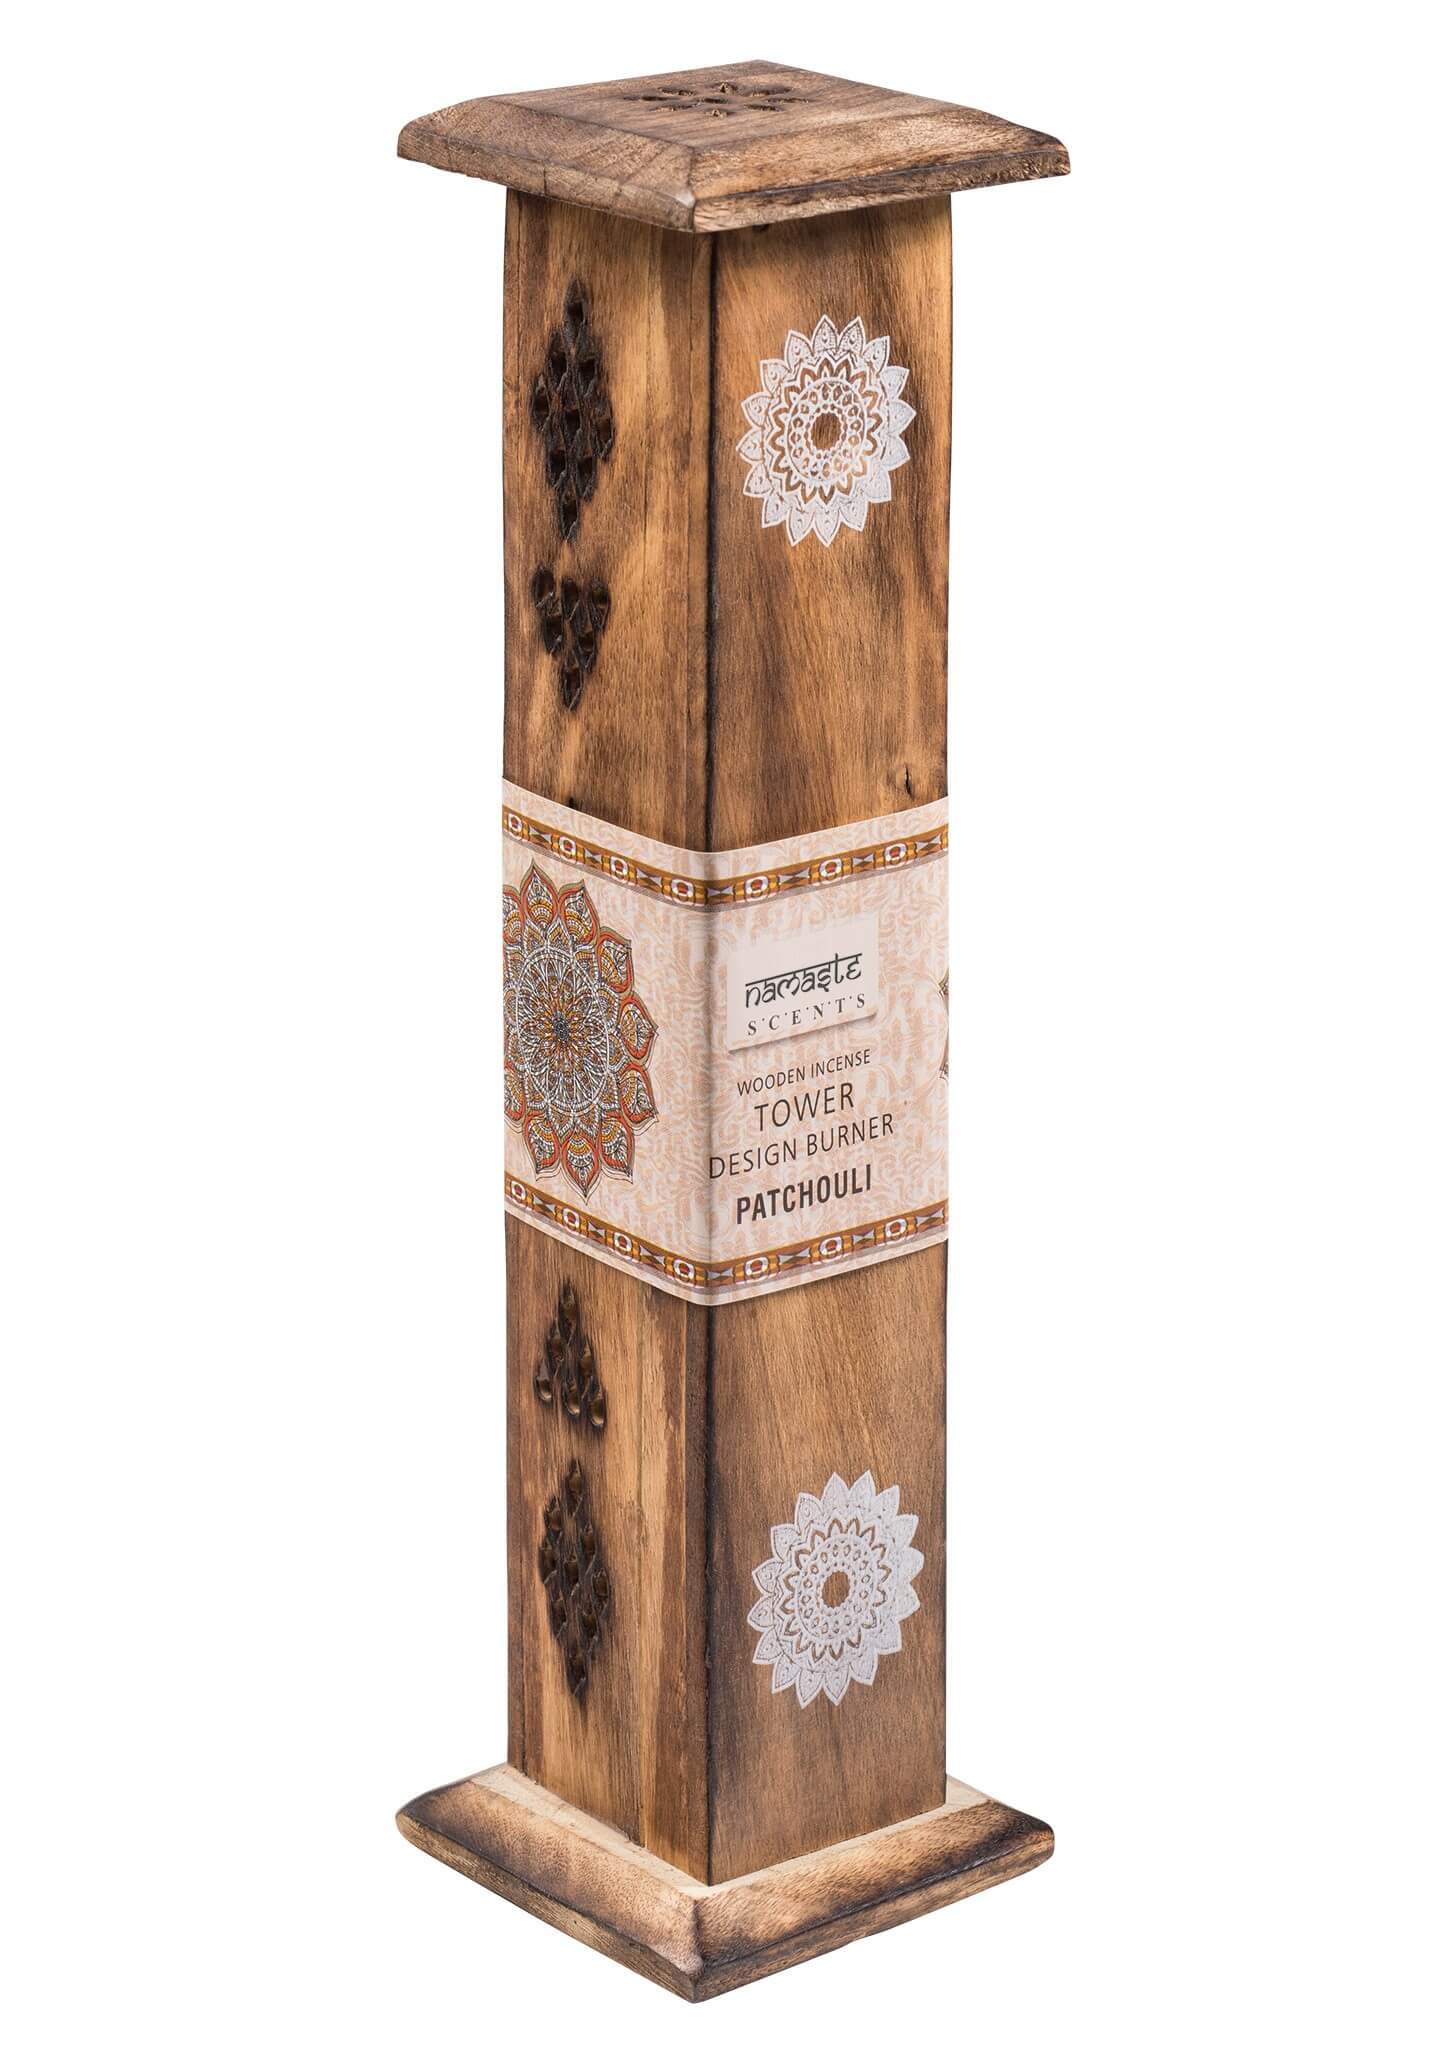 Mango Wood Incense Tower (with Incense) - patchouli